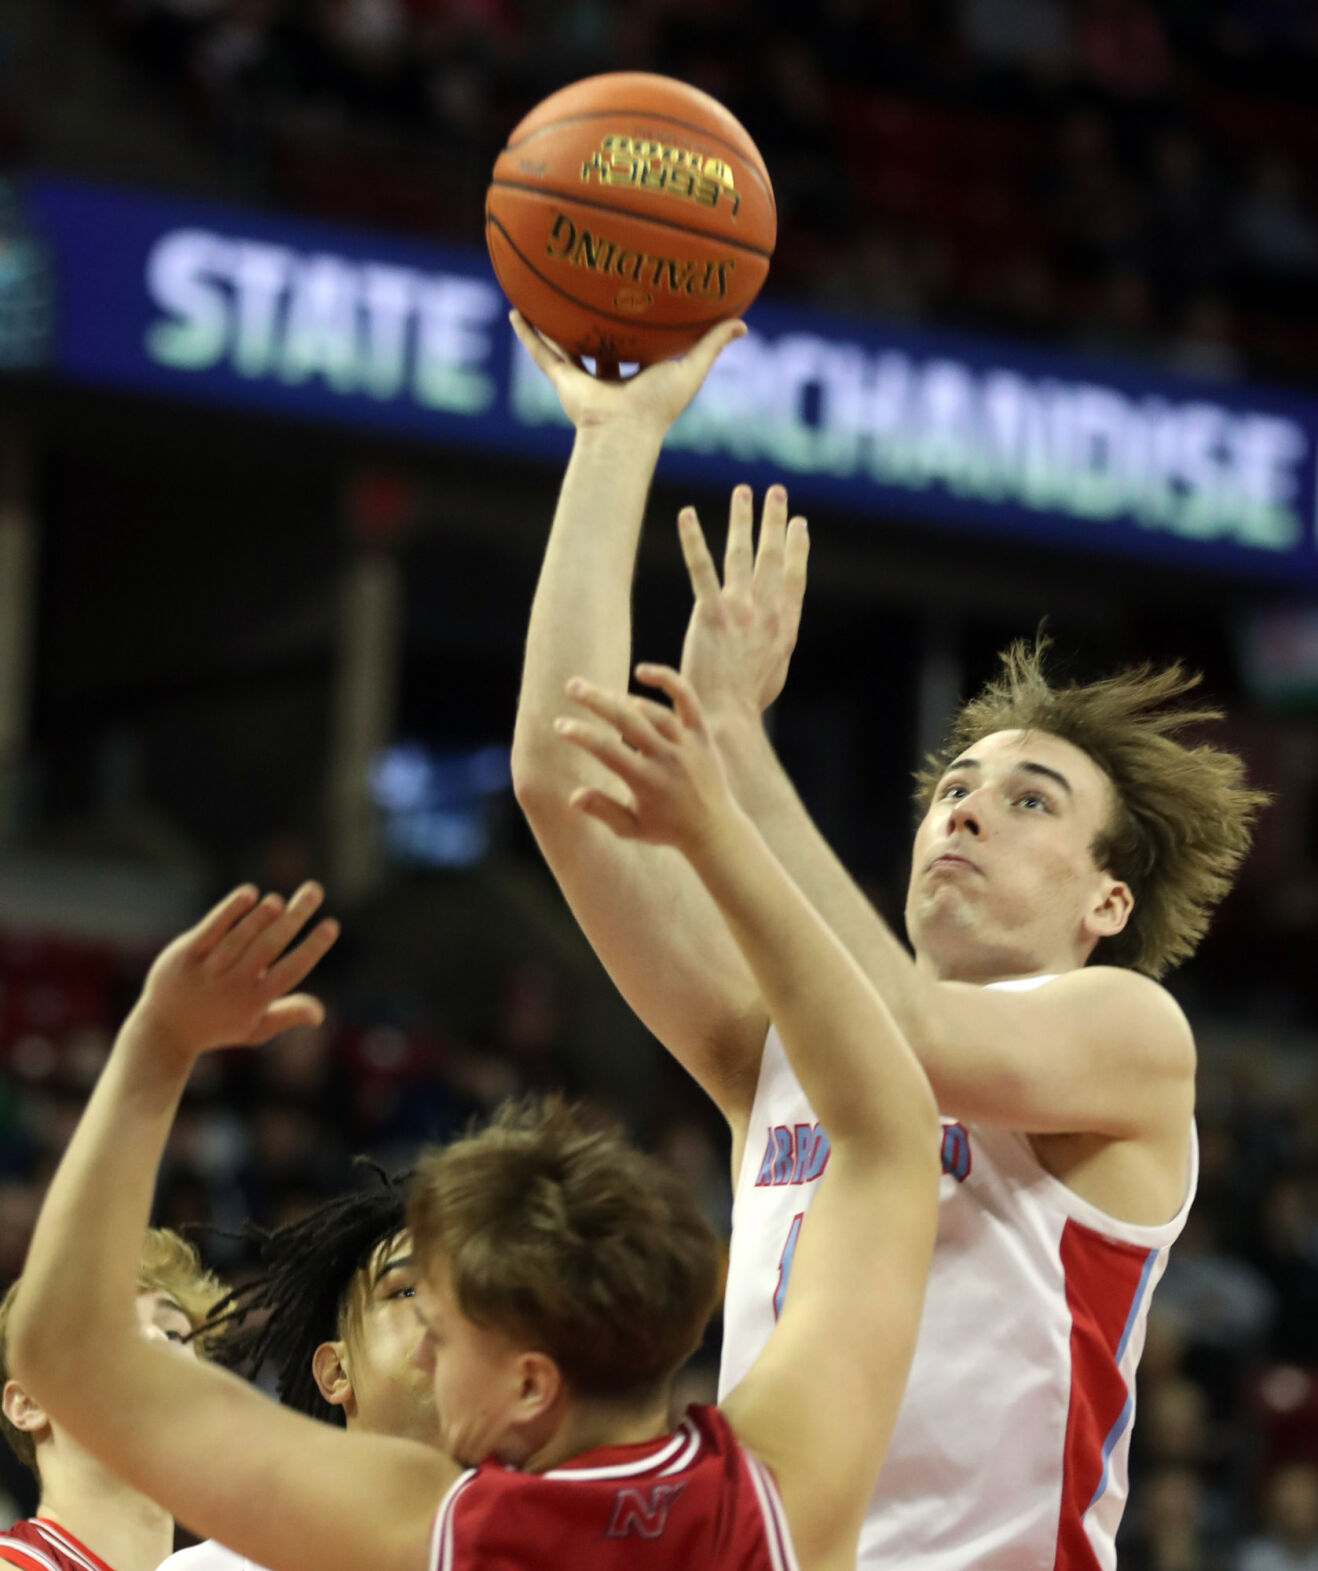 Arrowhead makes history with 4-overtime victory in thrilling state tourney semi-finals